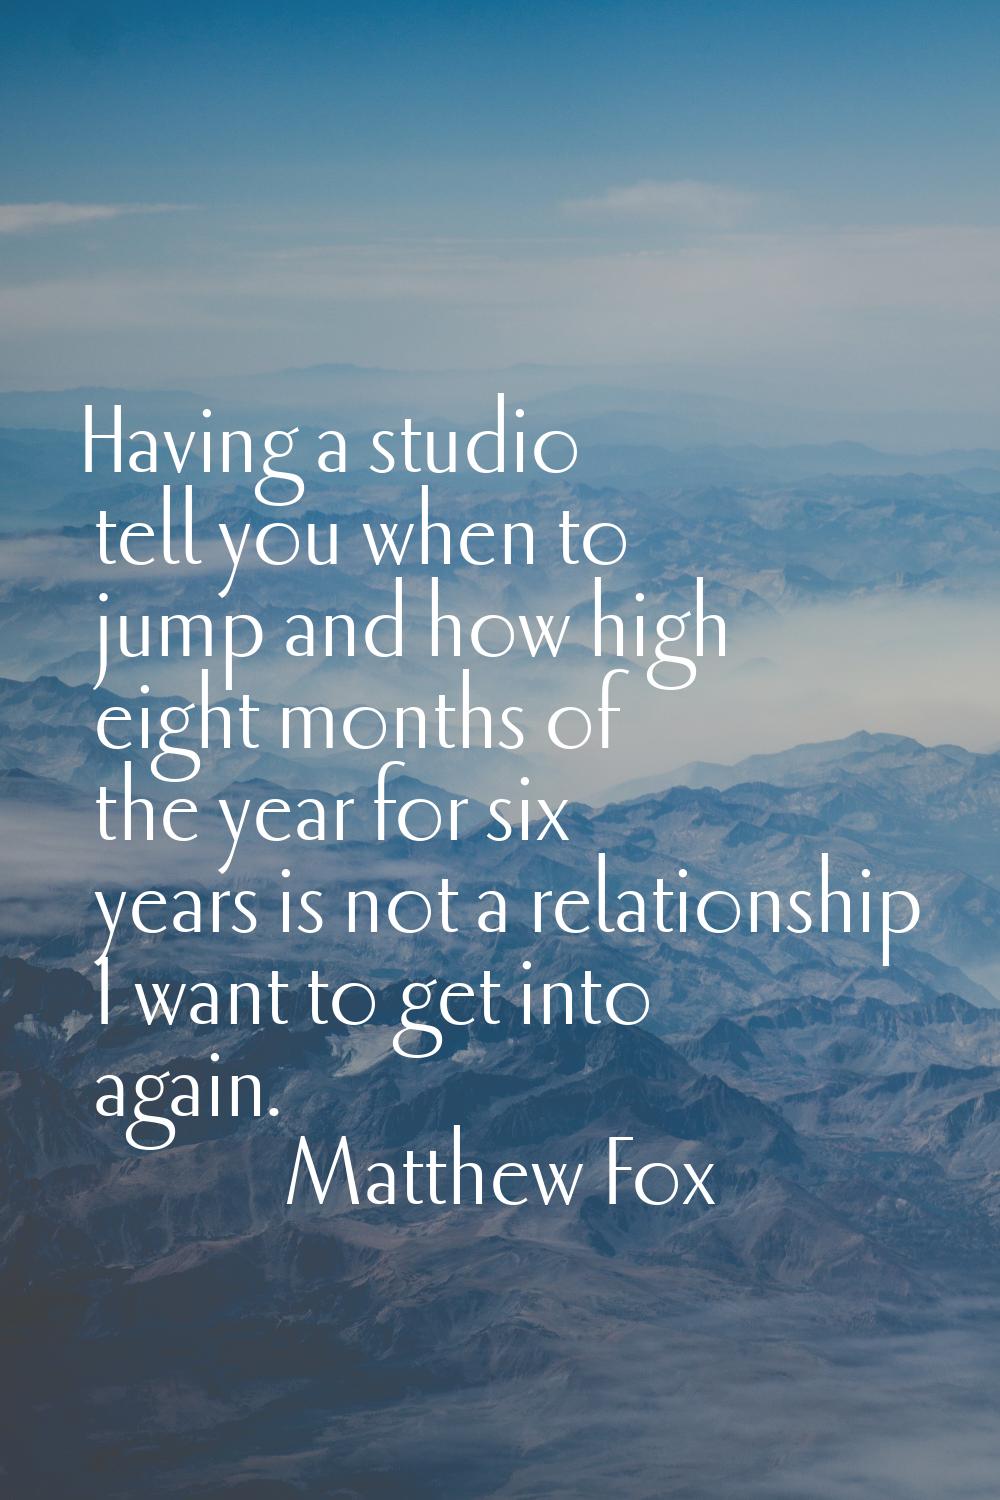 Having a studio tell you when to jump and how high eight months of the year for six years is not a 